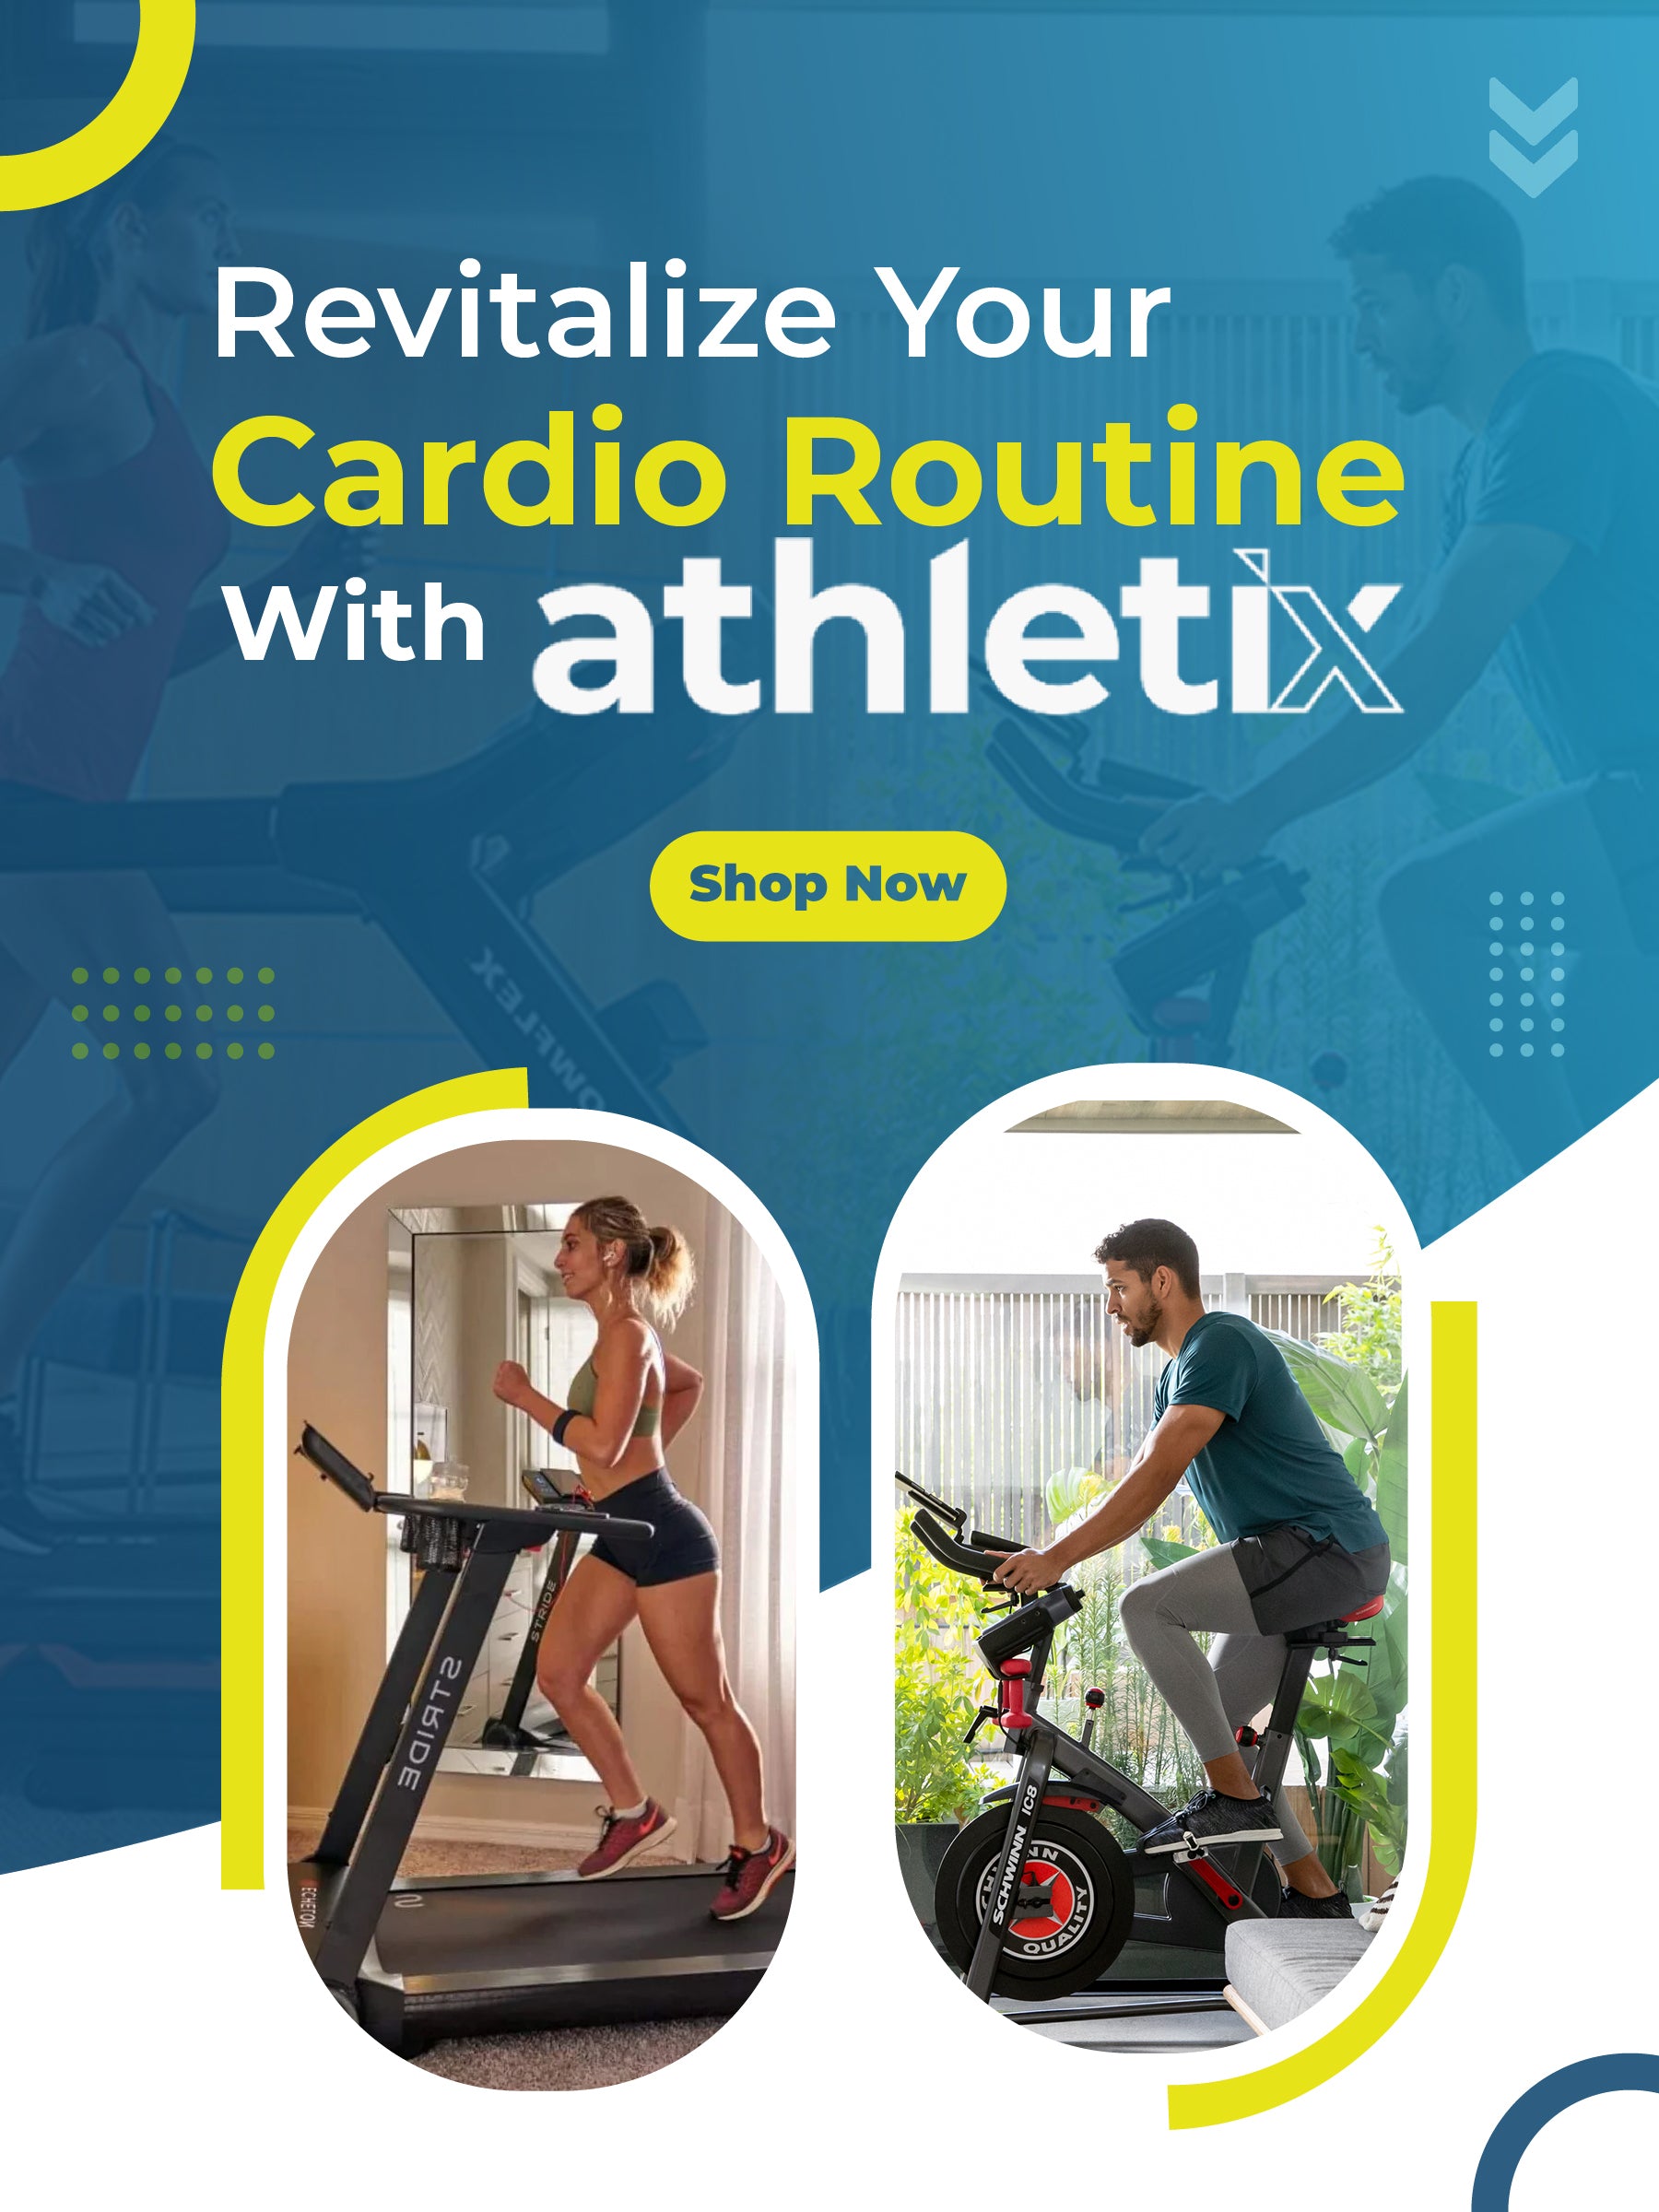 Get Top-Quality Sports & Fitness Equipment - UAE's Trusted Store